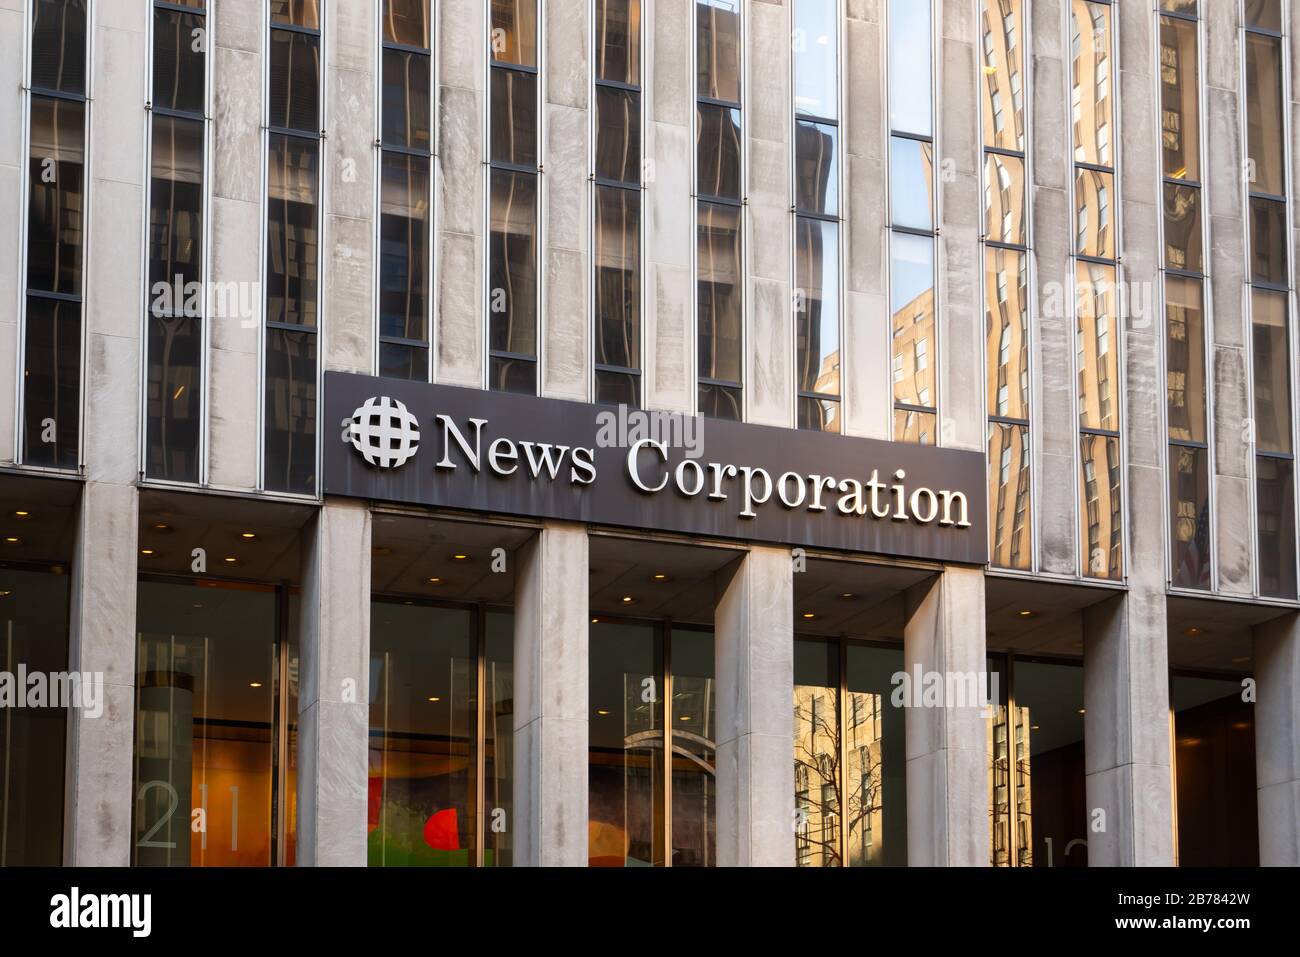 American mass media and publishing company News Corporation logo seen on a building. Stock Photo